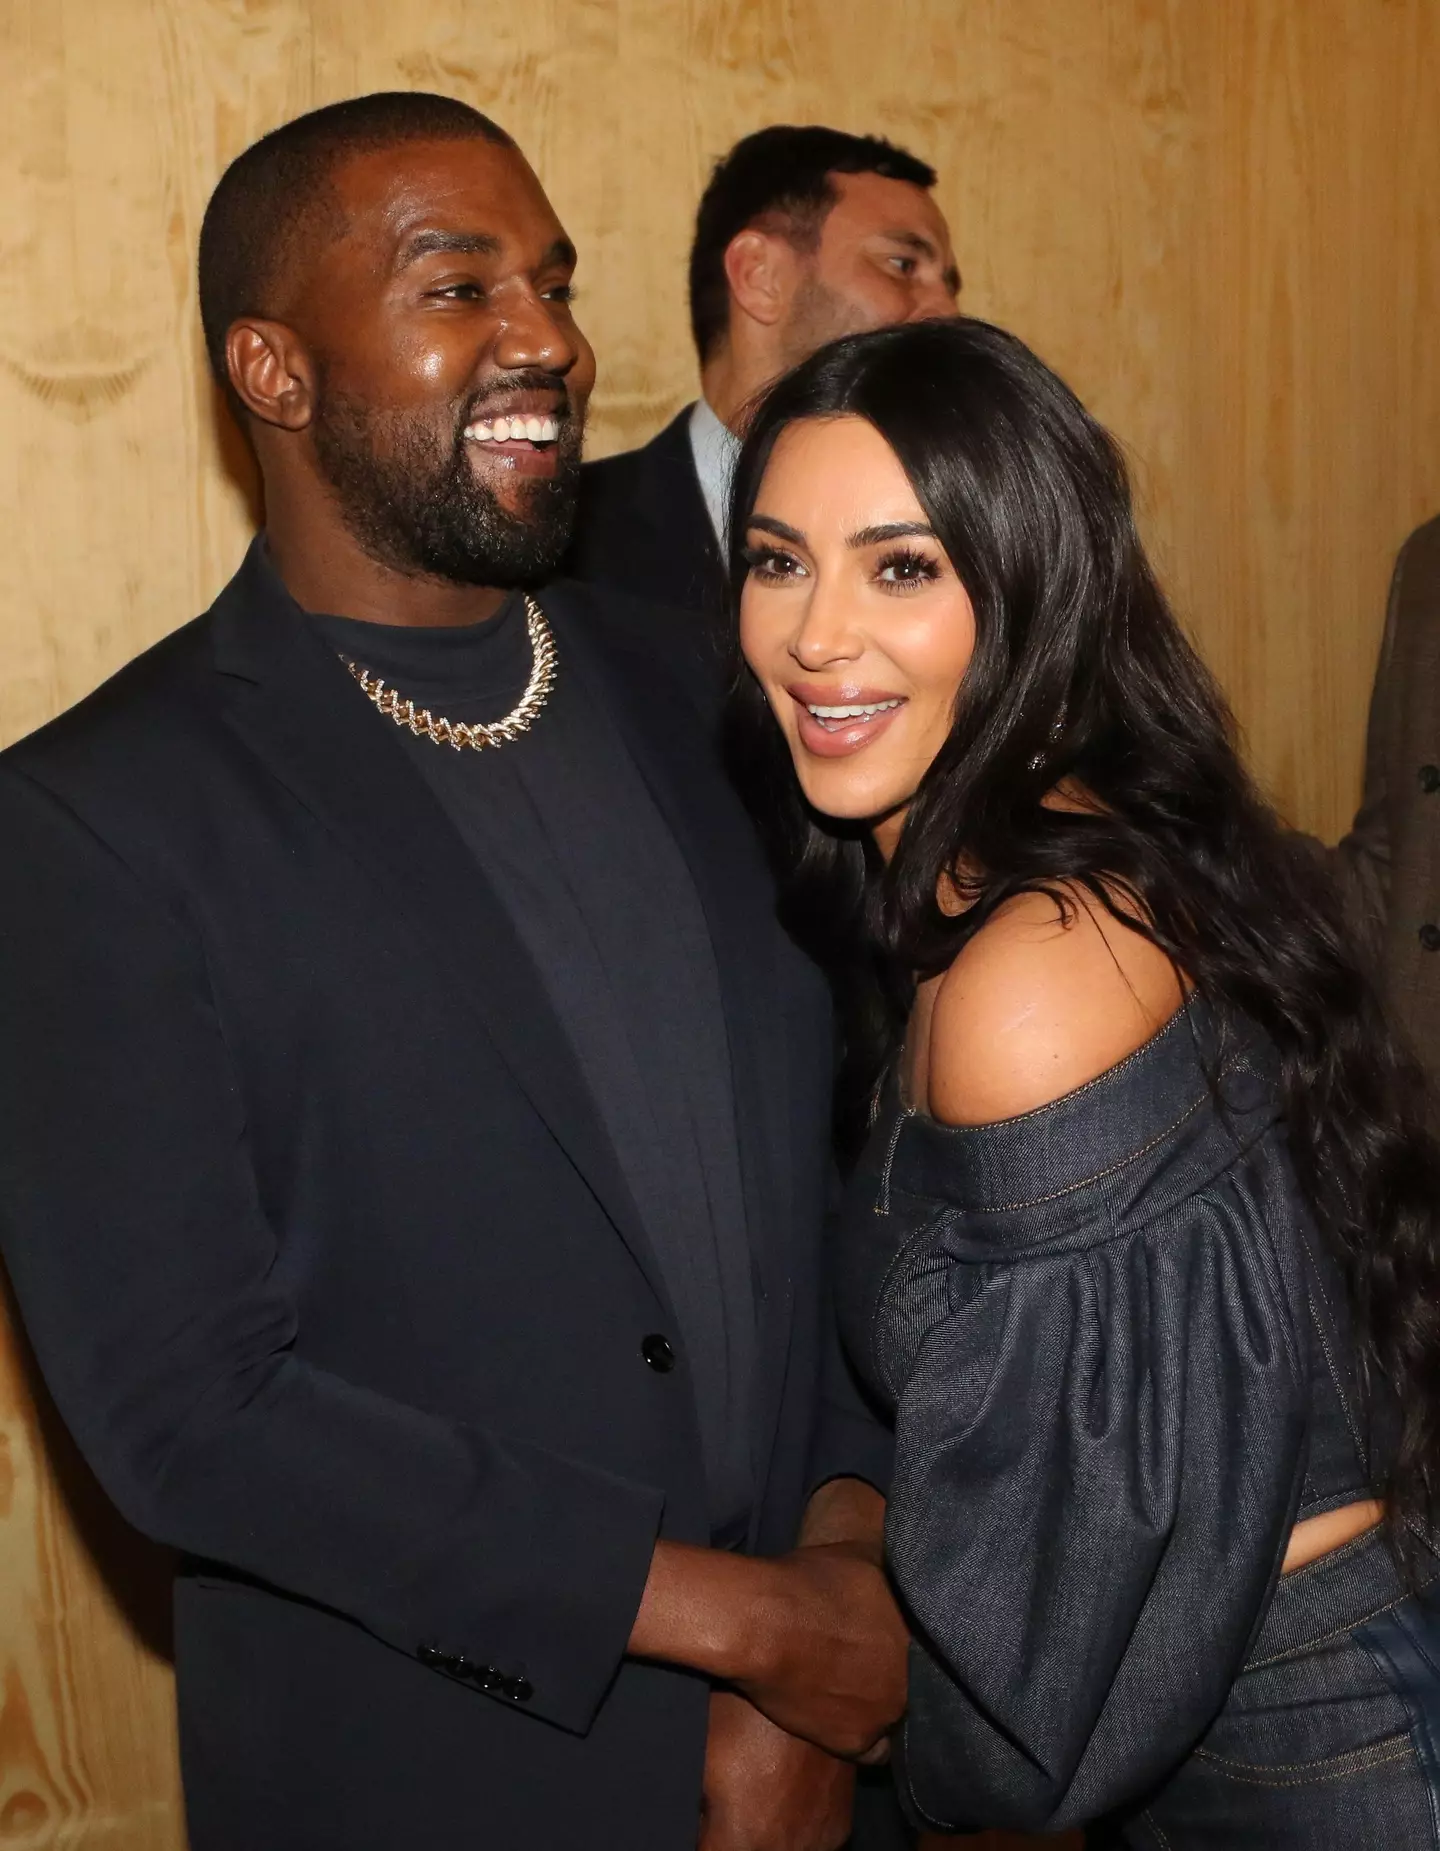 Kanye and Kim have gone their separate ways.